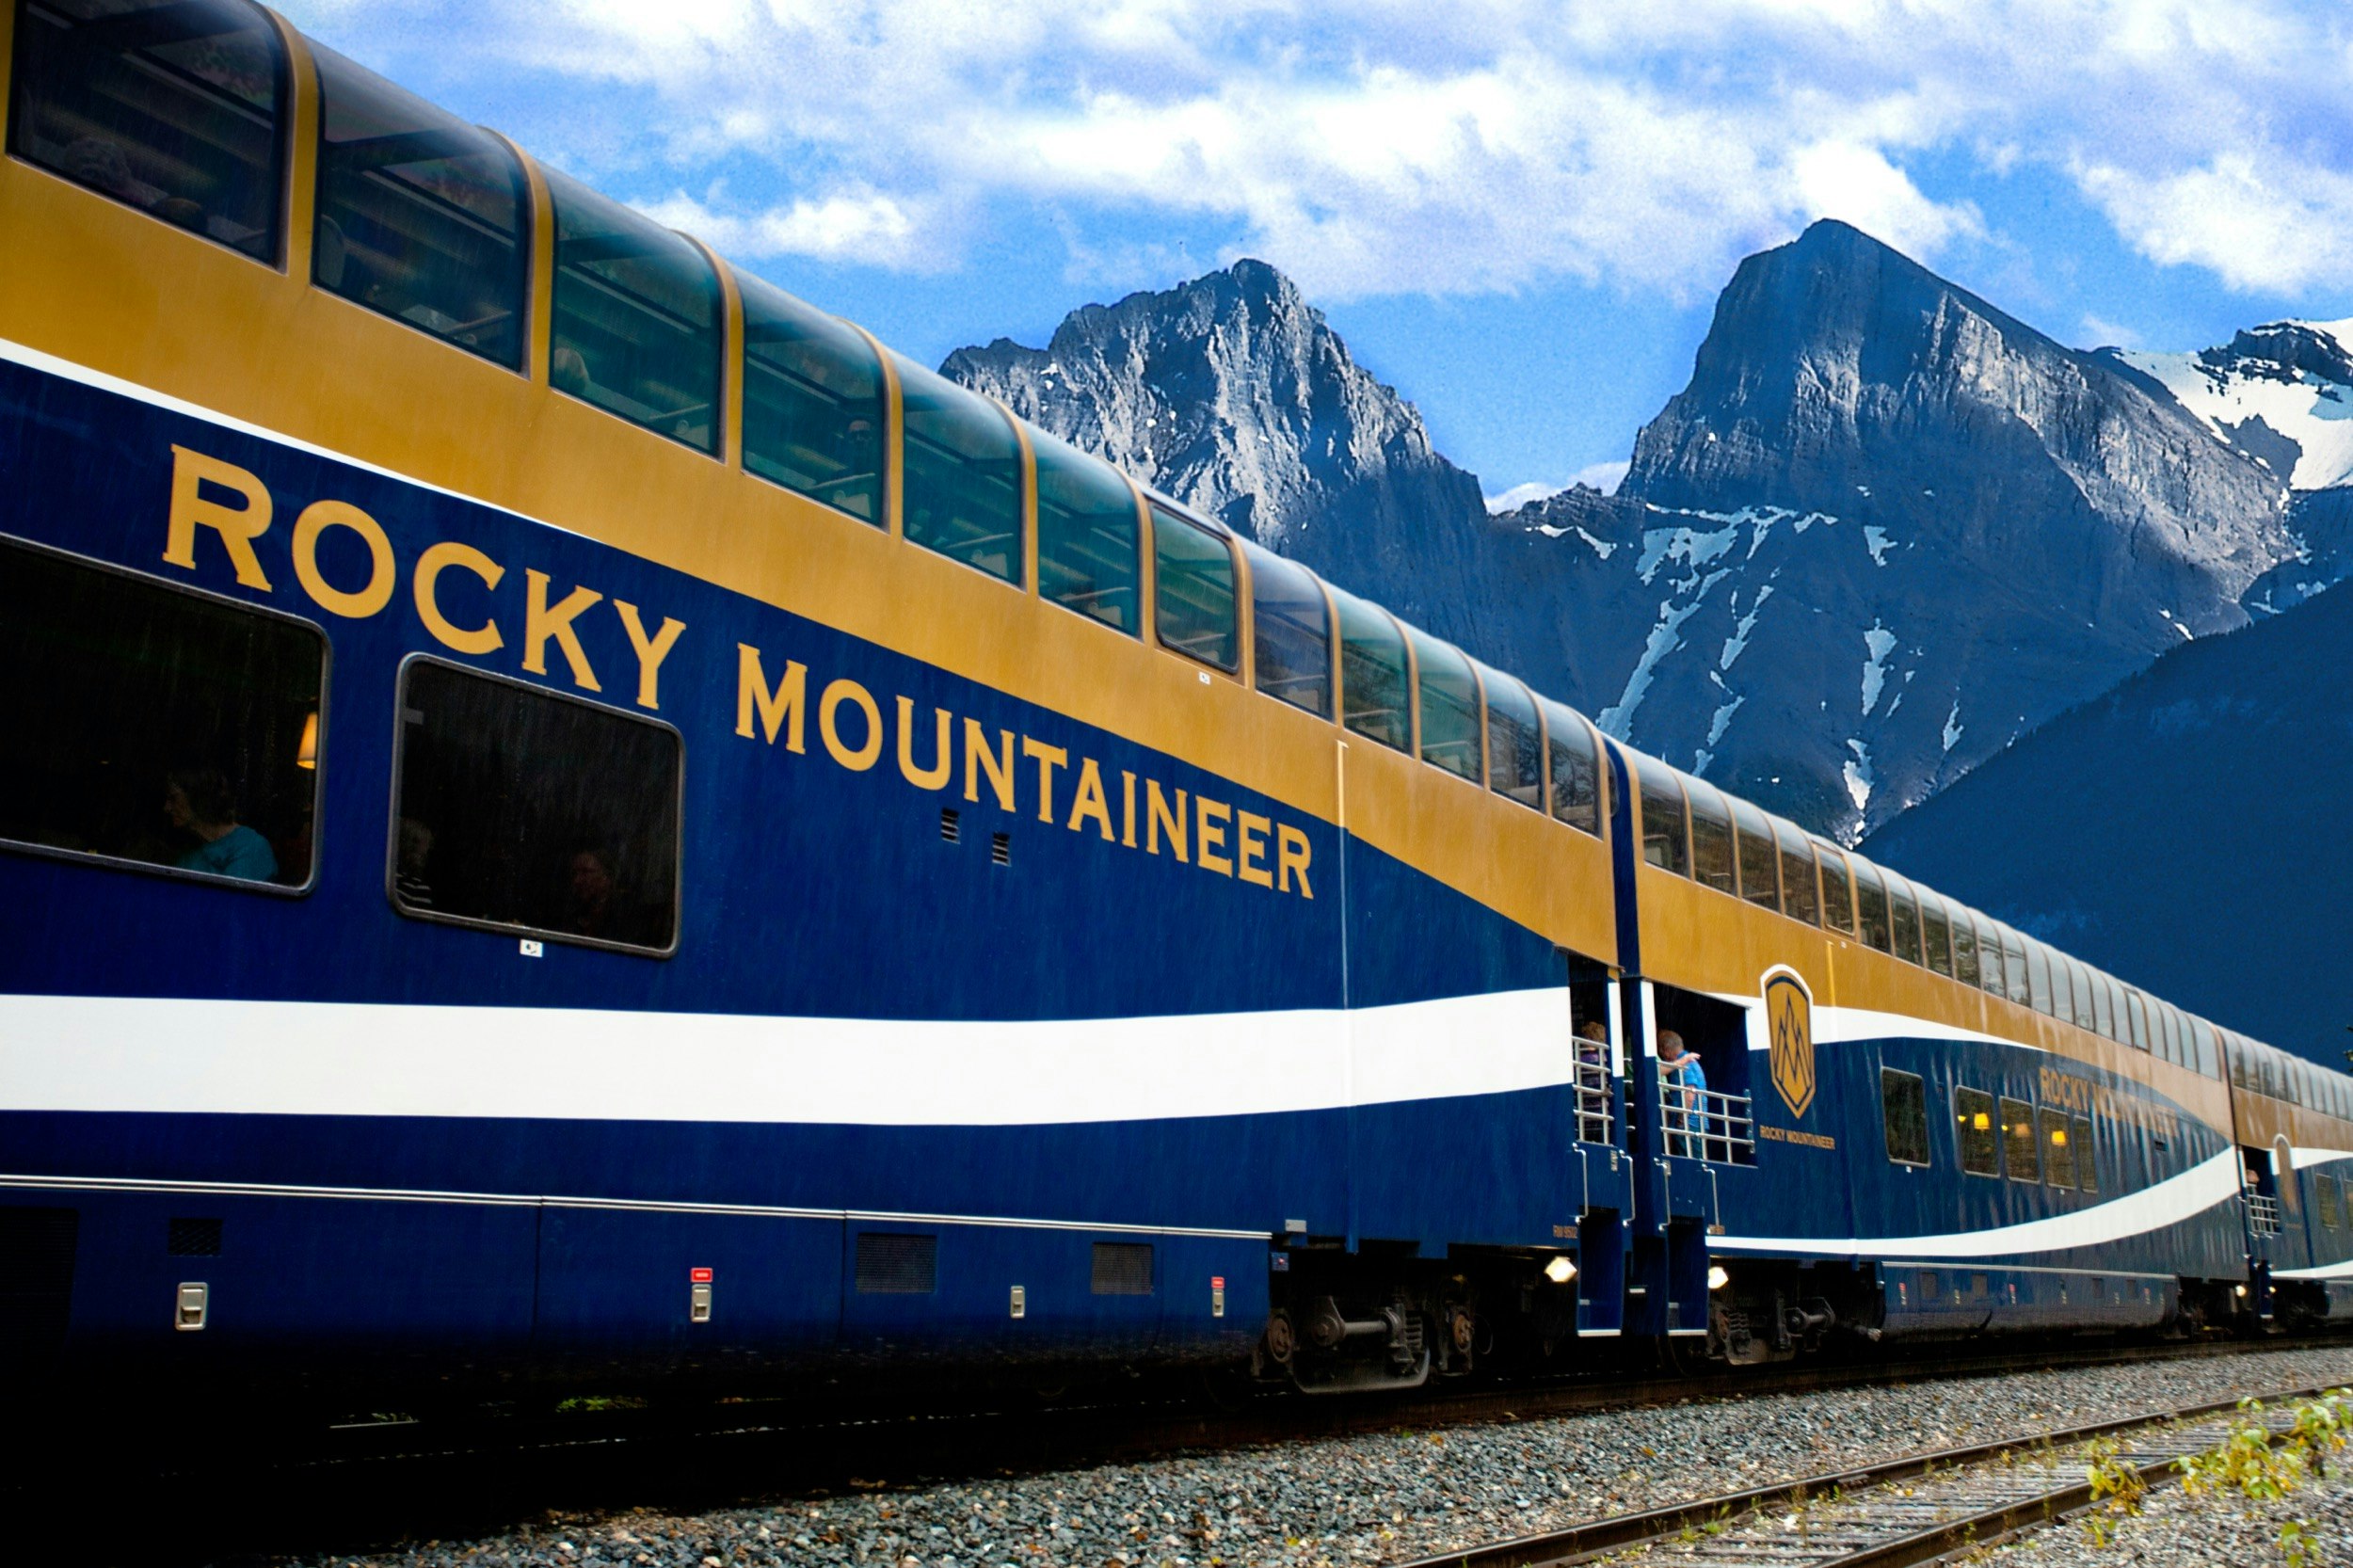 Looking up at a GoldLeaf service passenger car on the Rocky Mountaineer train with a craggy peak in the background